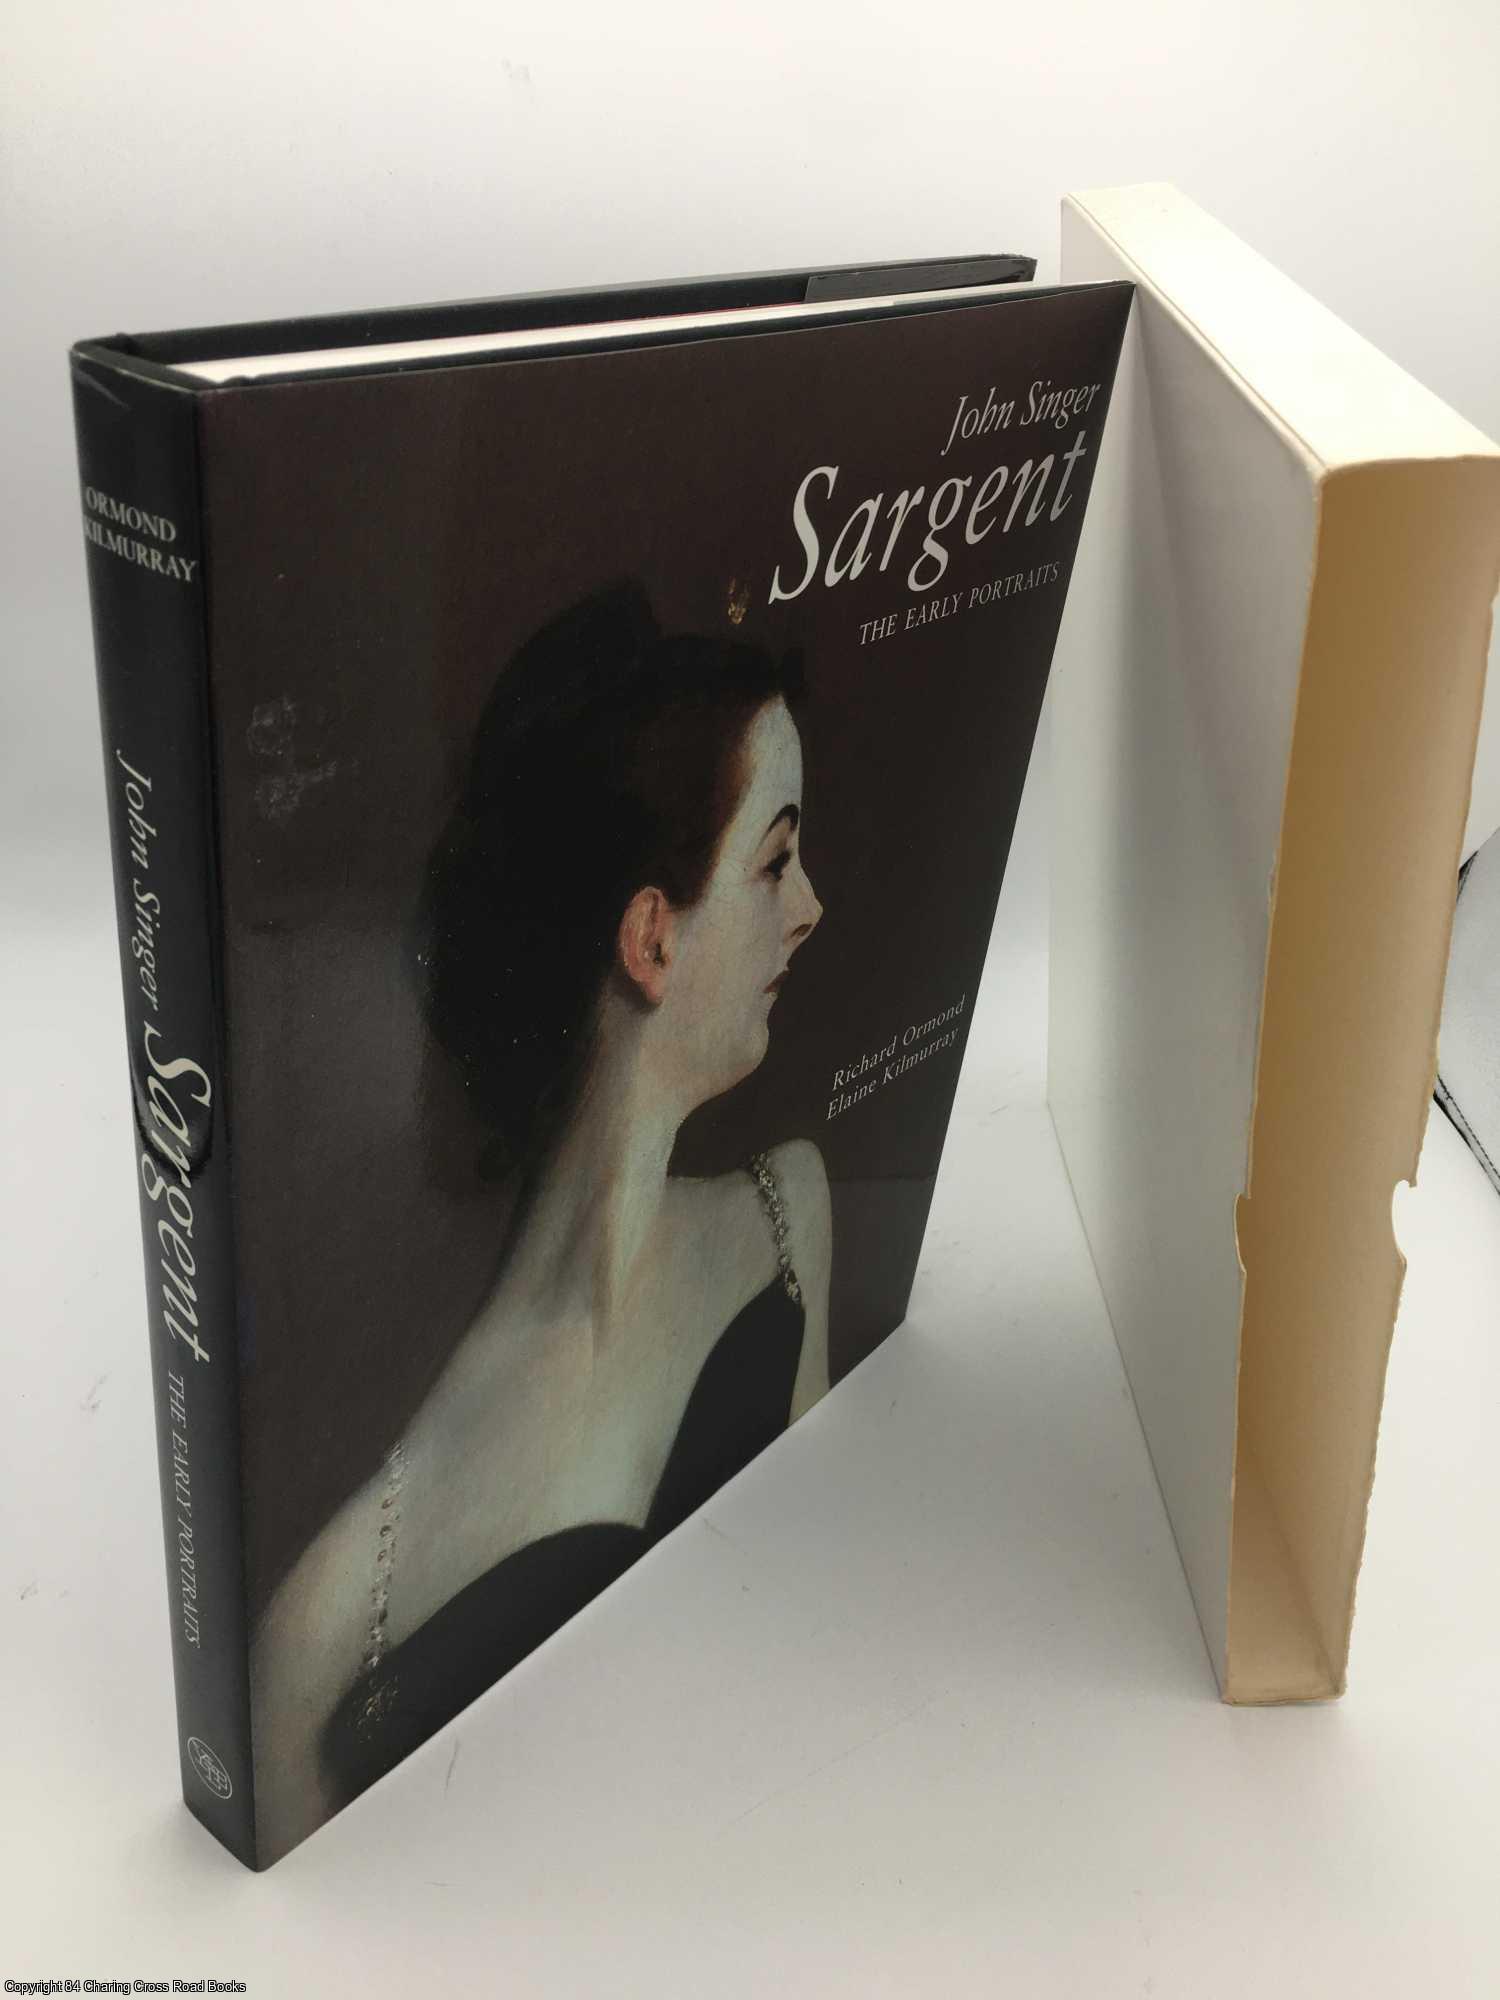 Ormond, Richard - John Singer Sargent, Complete Paintings, Volume 1: The Early Portraits